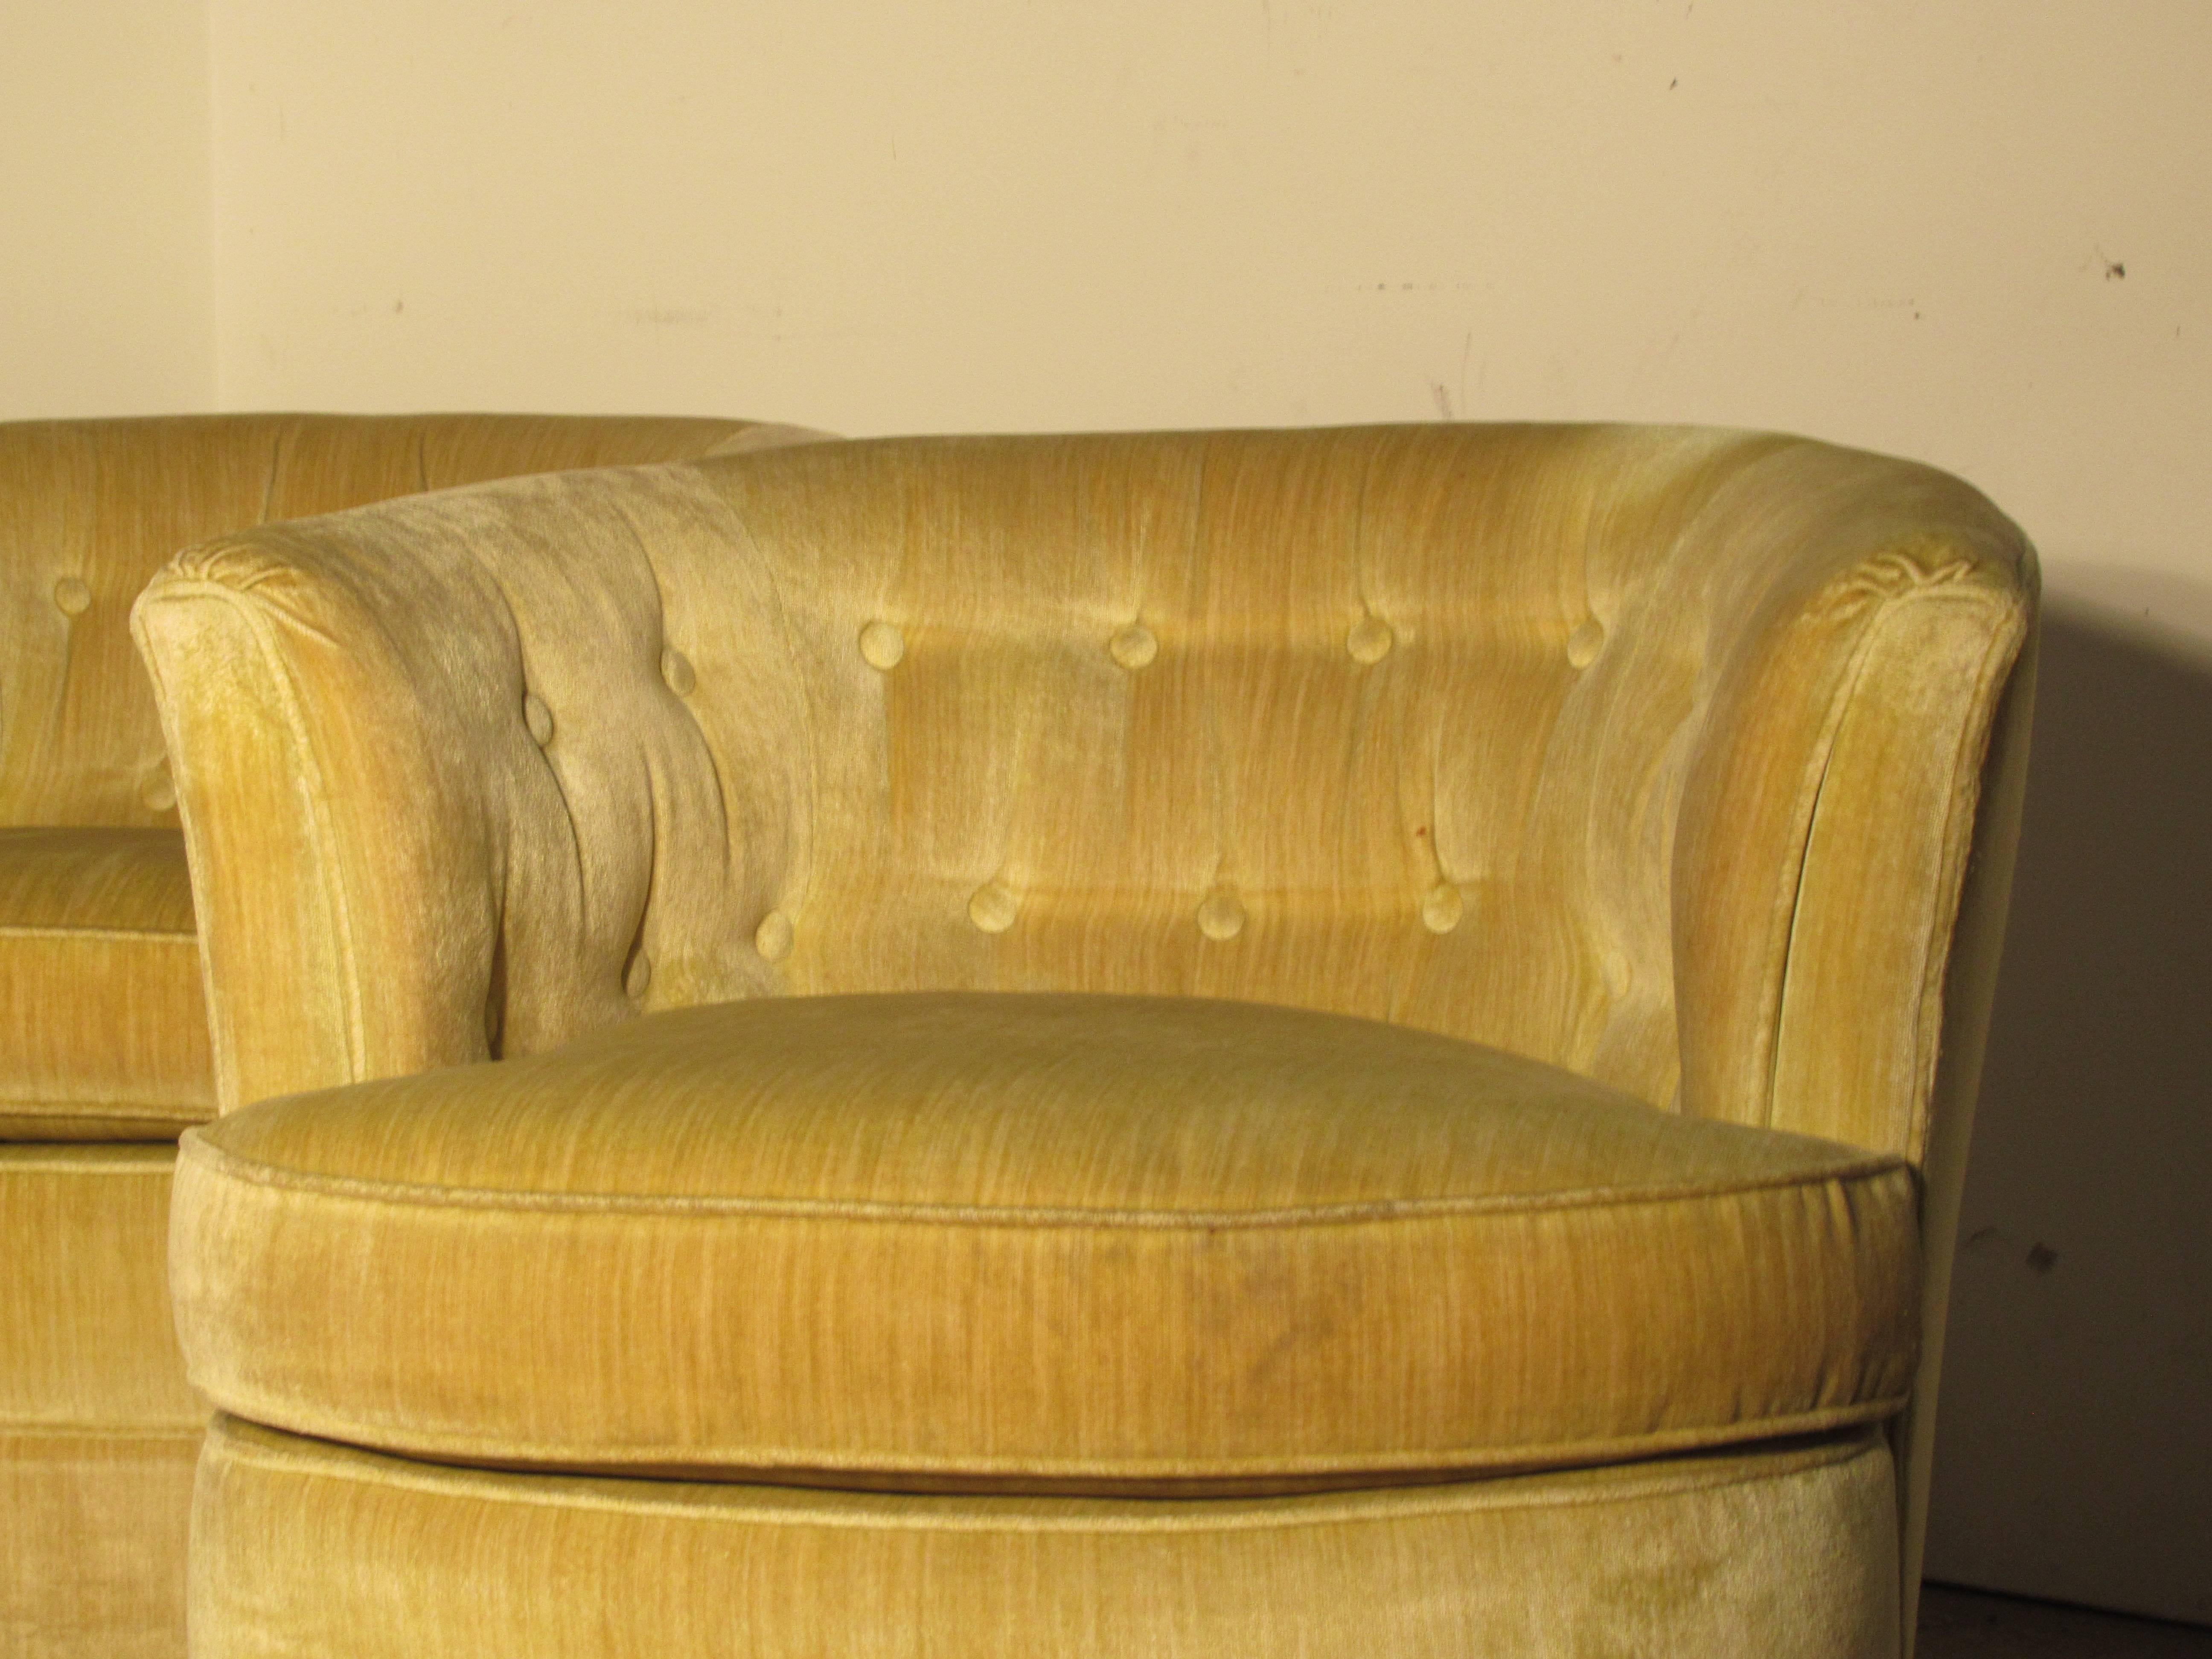 Upholstery Milo Baughman Style Button Tufted Swivel Barrel Chairs